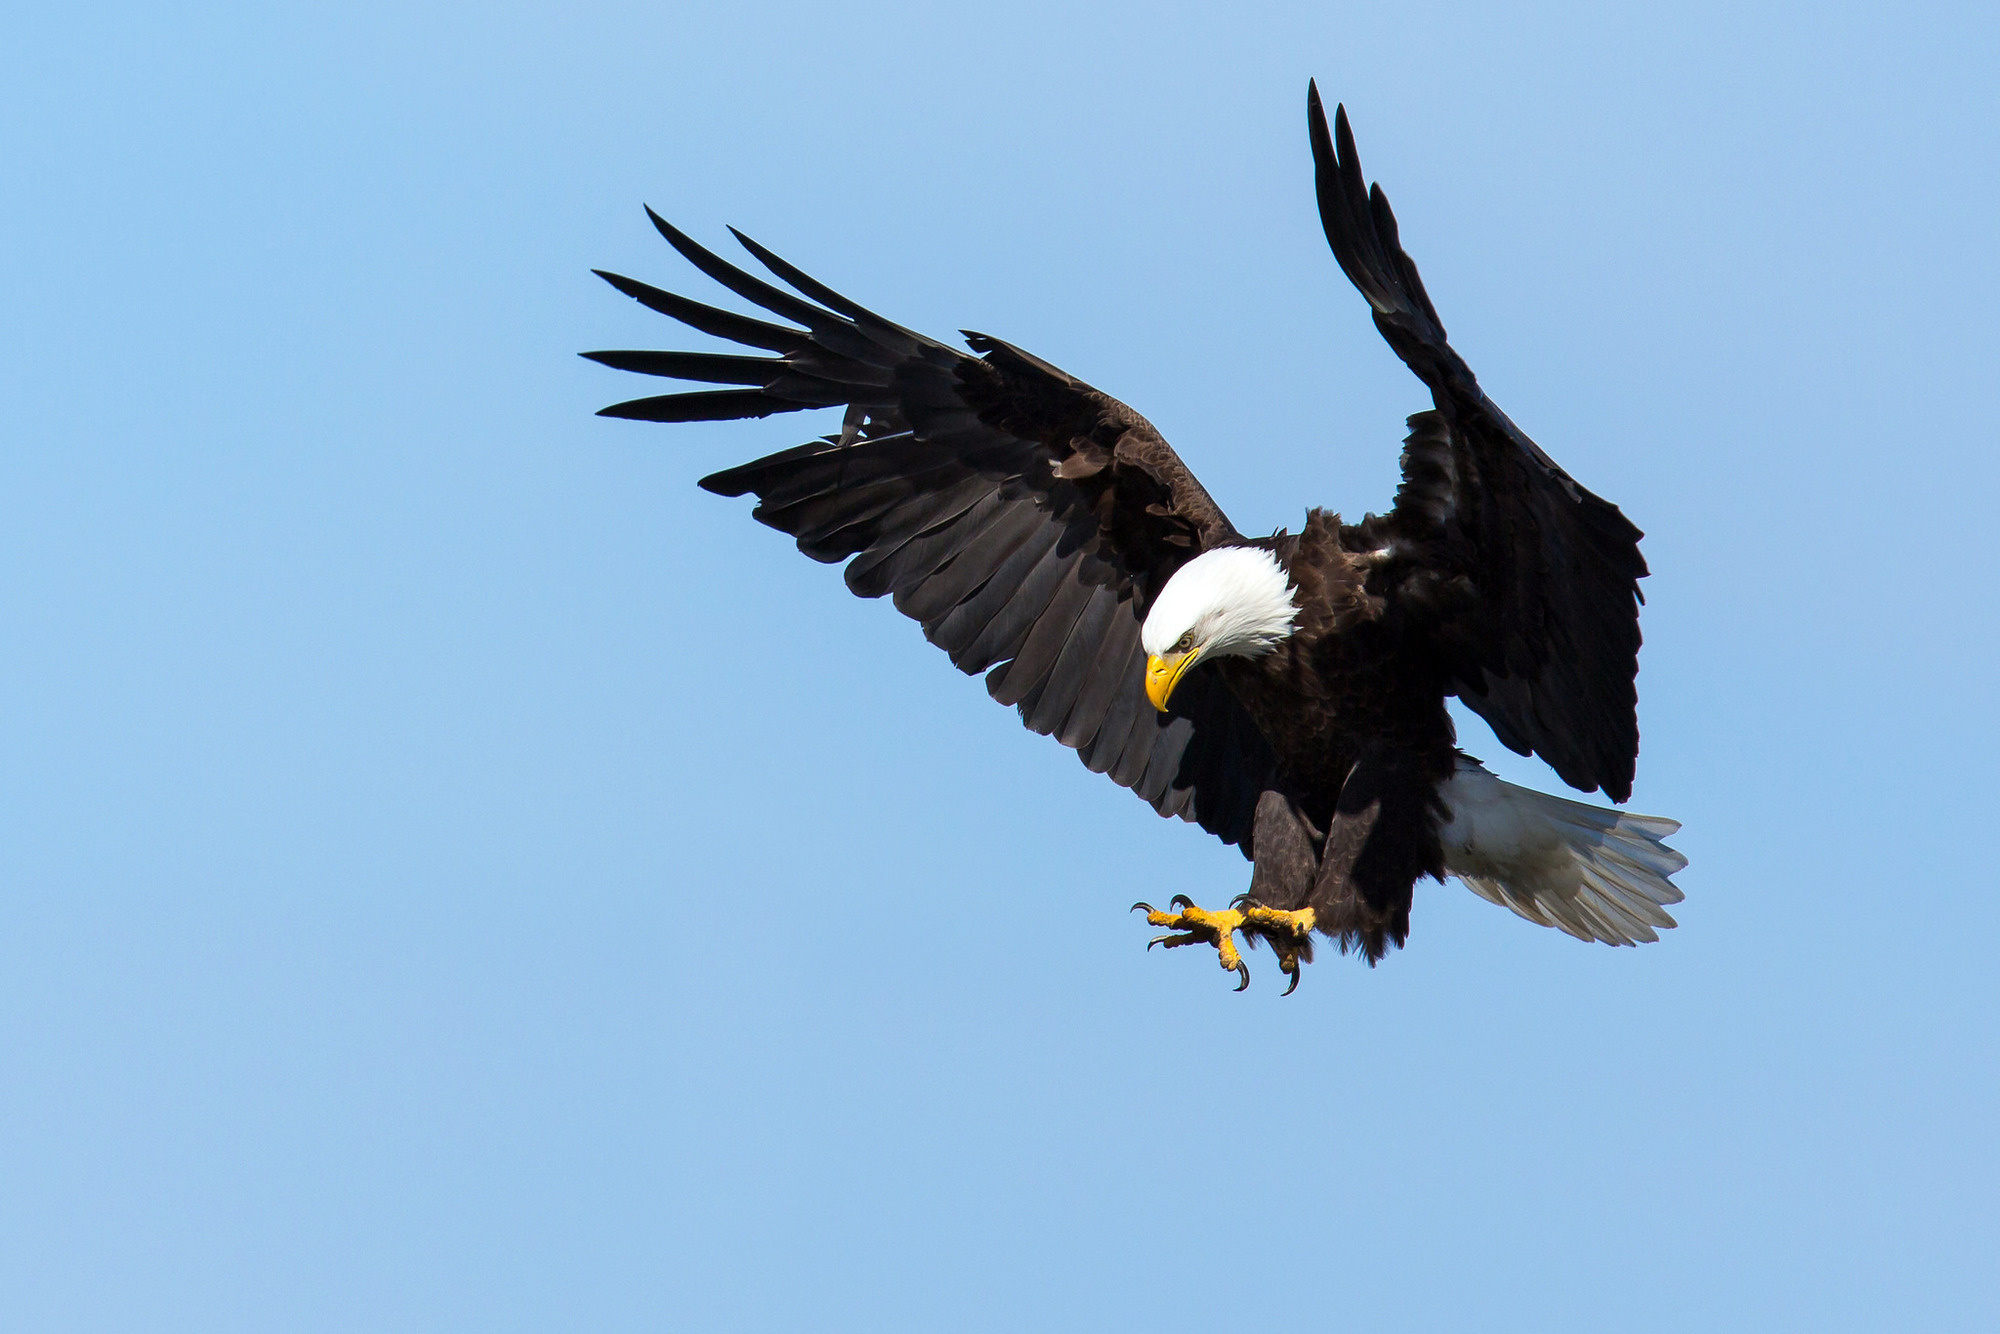 The bald eagle knows what to do when it loses one feather from a wing. The bird will simply lose a feather from the opposite wing to maintain its balance.